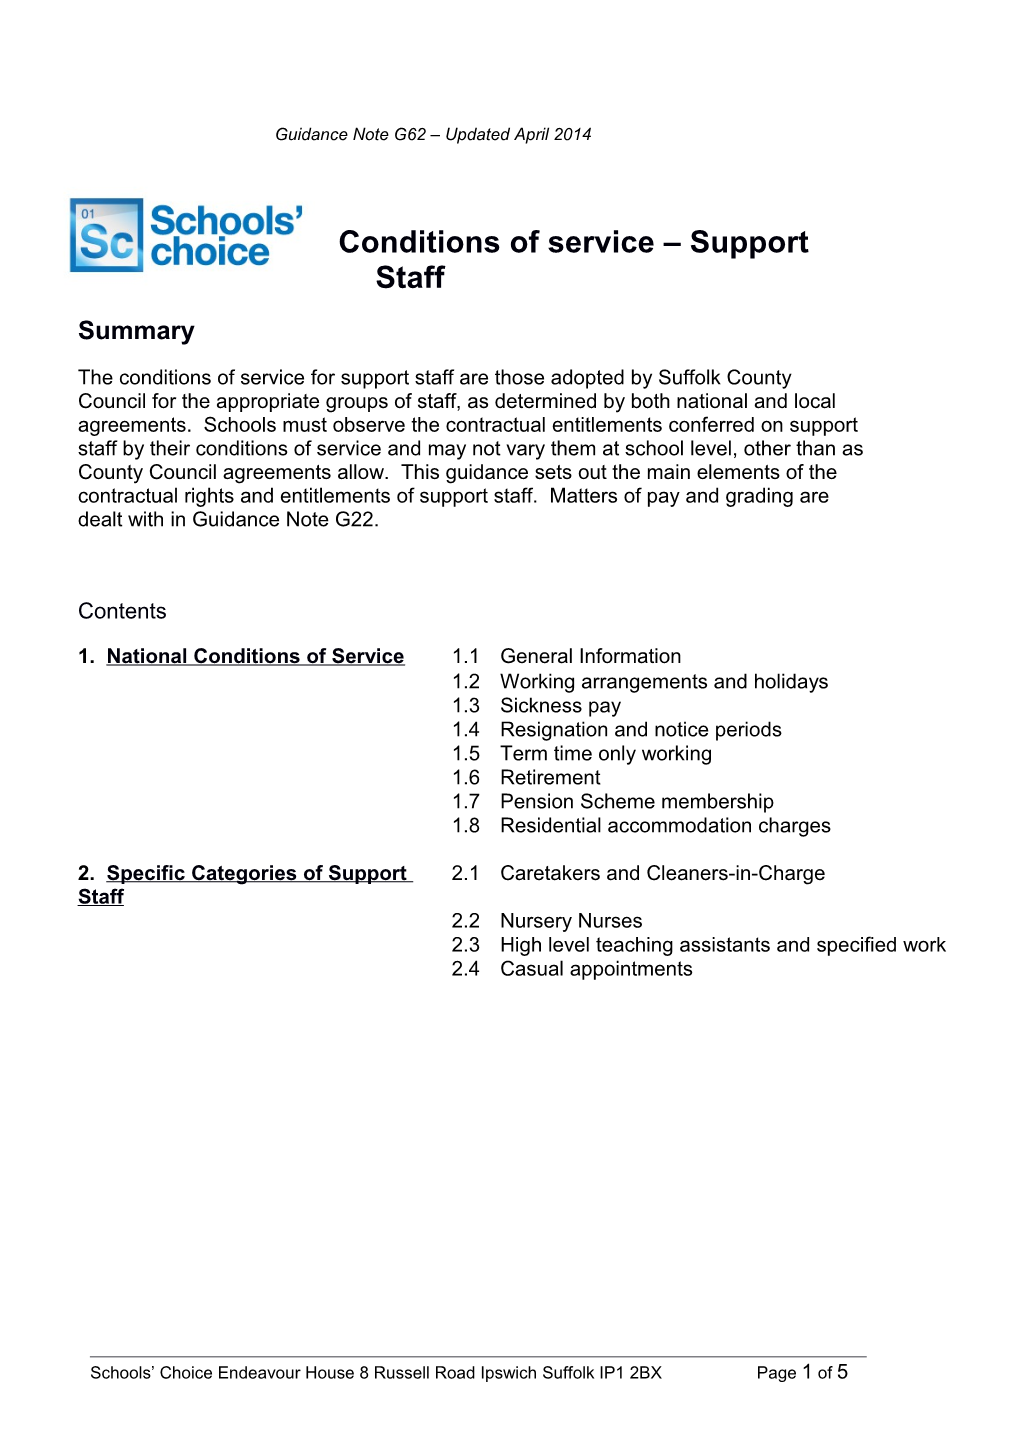 Conditions of Service Support Staff